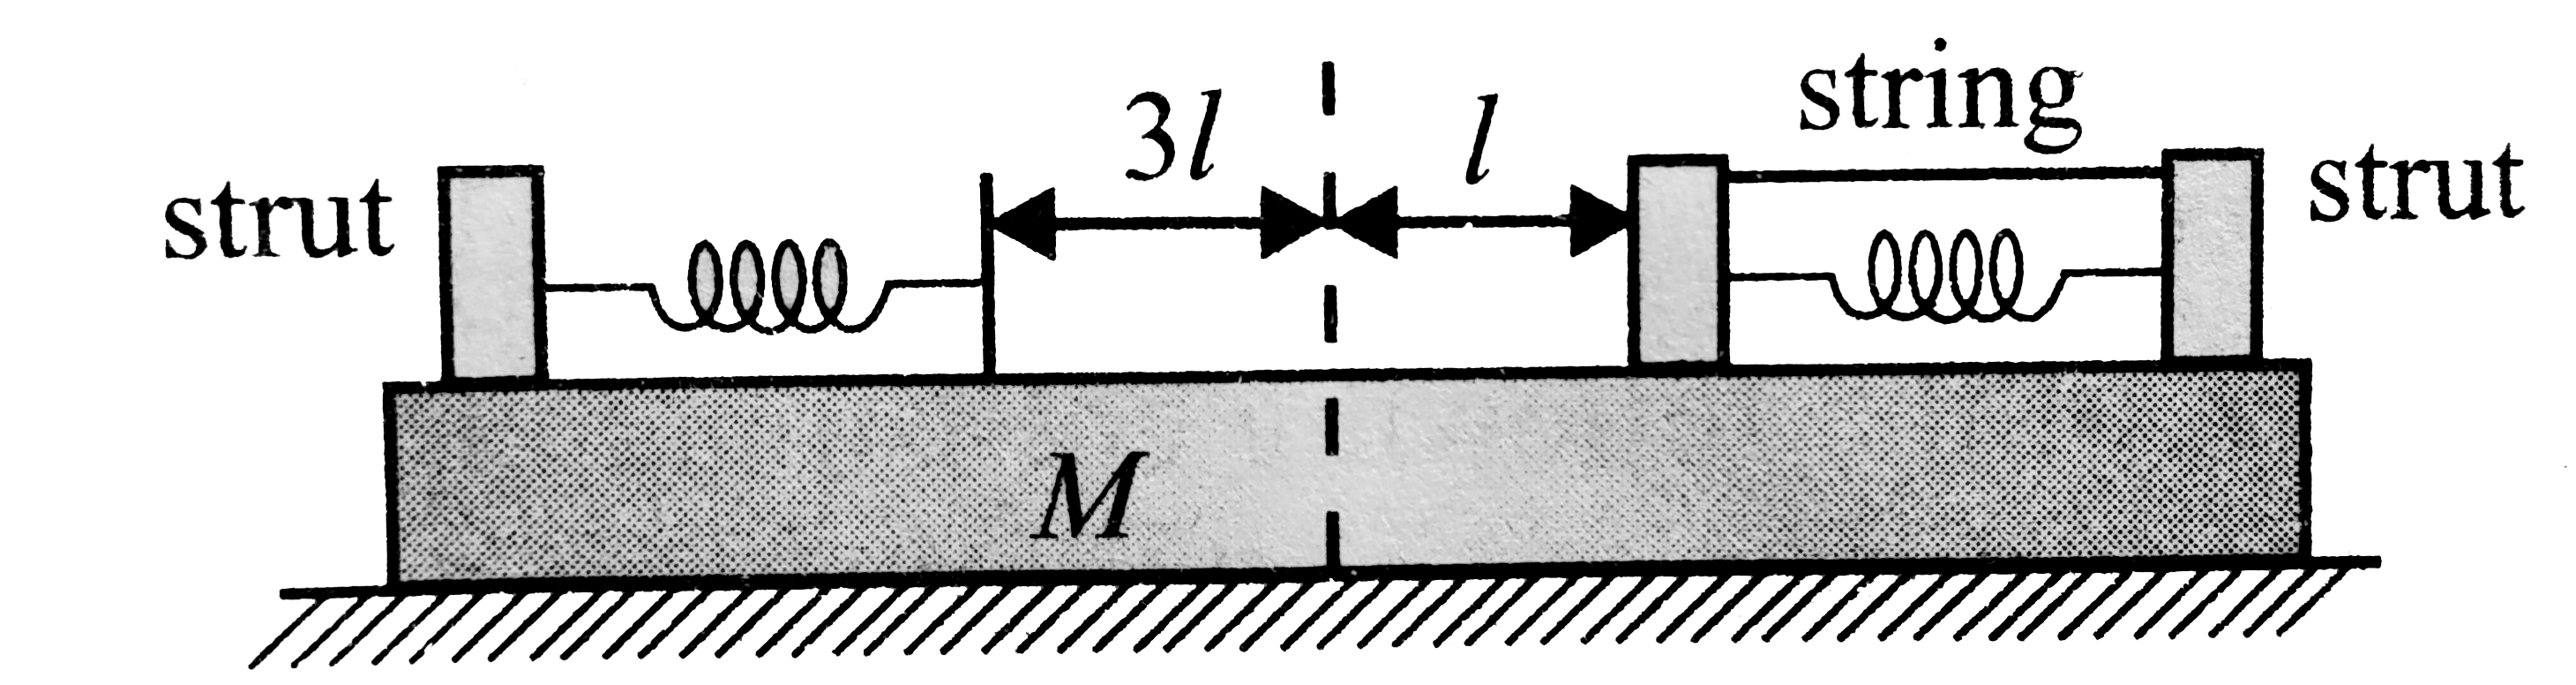 According to the principle of conservation of linear momentum if the external force acting on the system is zero, the linear momentum of the system will remain conserved. It means if the centre of mass of a system is initially at rest, it will remain at rest in the absence of external force, that is, the displacement of centre of mass will be zero.   A plank of mass M is placed on a smooth horizontal surface.  light identical springs, each of stiffness K, are rigidly connected to struts at the end of the plank as shown in Fig. When the springs are in their unextended position, the distance between their free ends is 3l. A block of mass m is placed on the plank and pressed against one of the springs so that it is compressed to l.  To keep the block at rest it is connected to the strut means of a light string. Initially, the system is at rest, Now the string is burnt.      The maximum displacement of the plank is